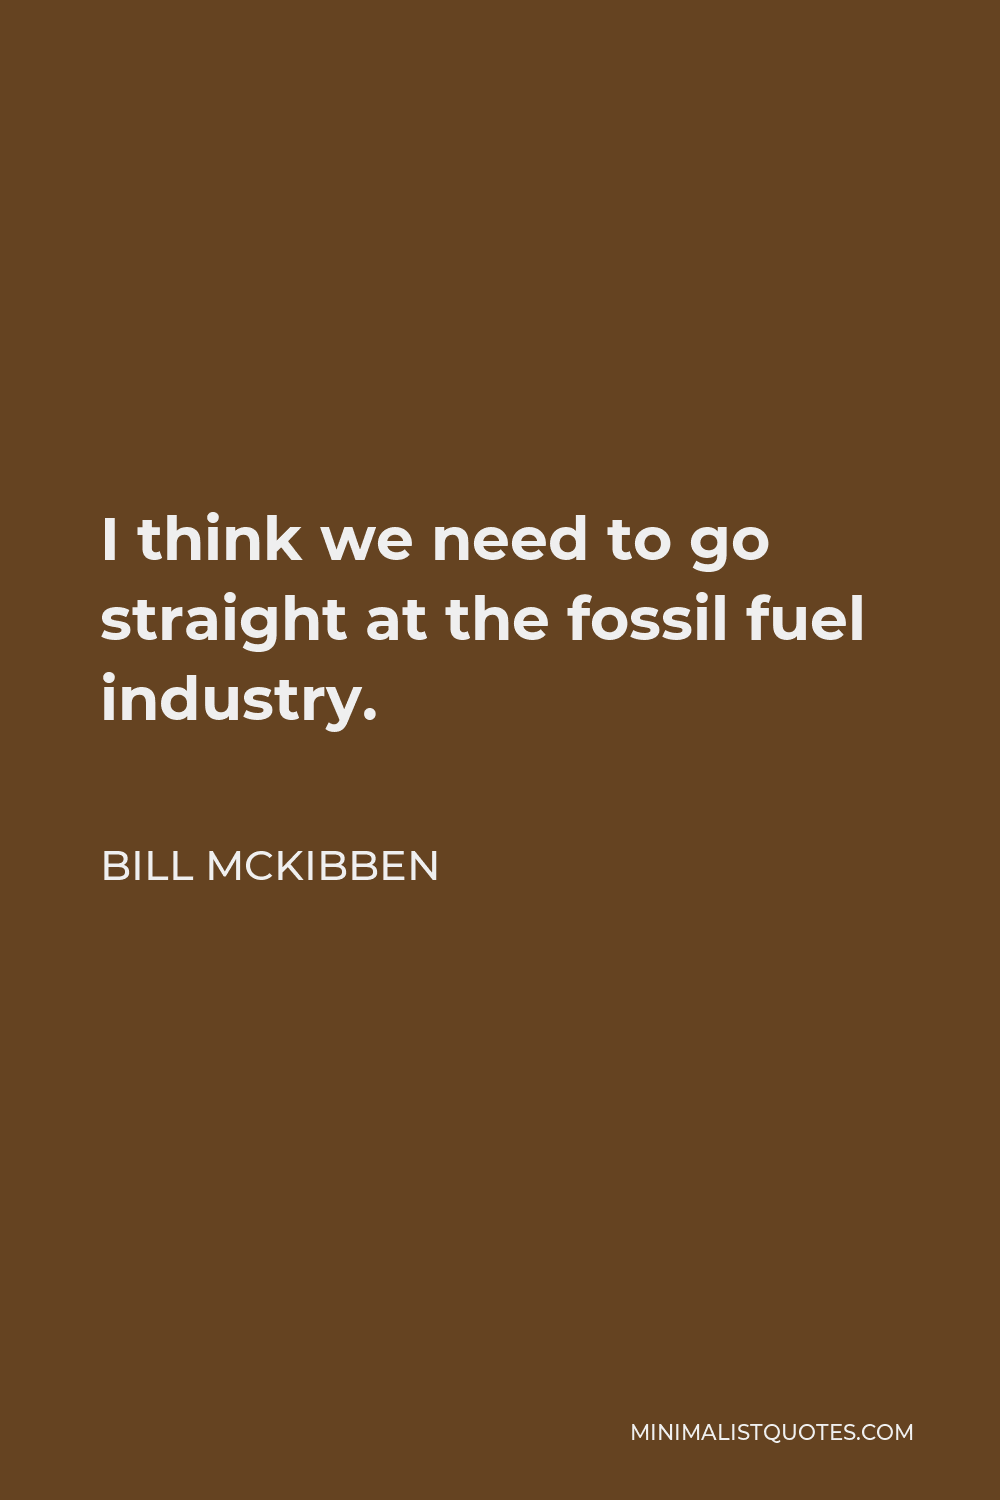 Bill McKibben Quote - I think we need to go straight at the fossil fuel industry.